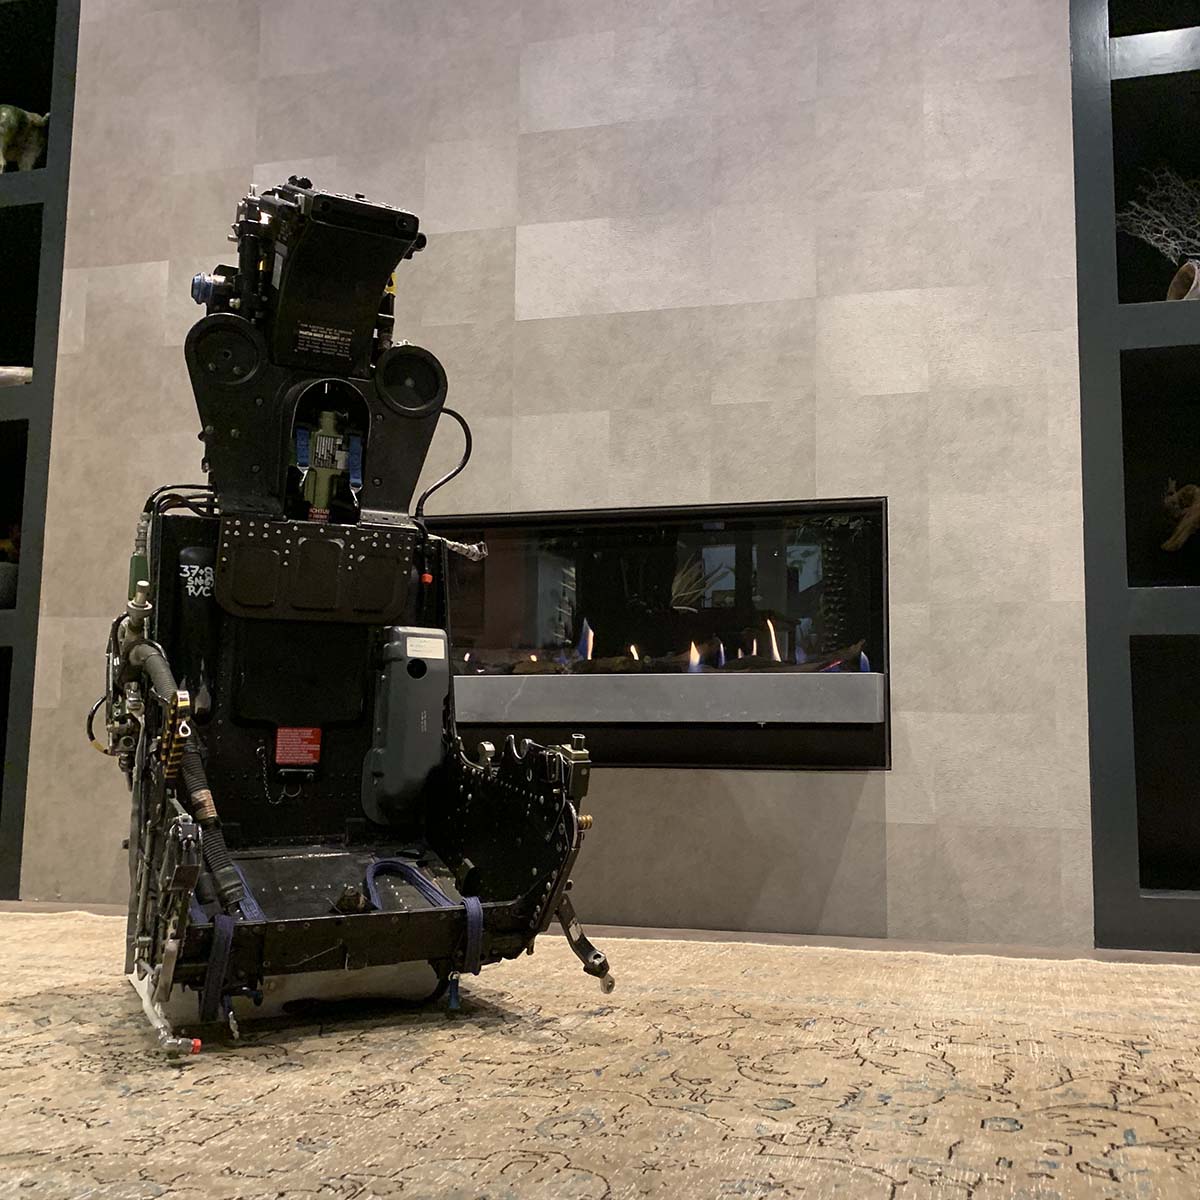 A Martin Baker ejection seat in front of a fireplace.